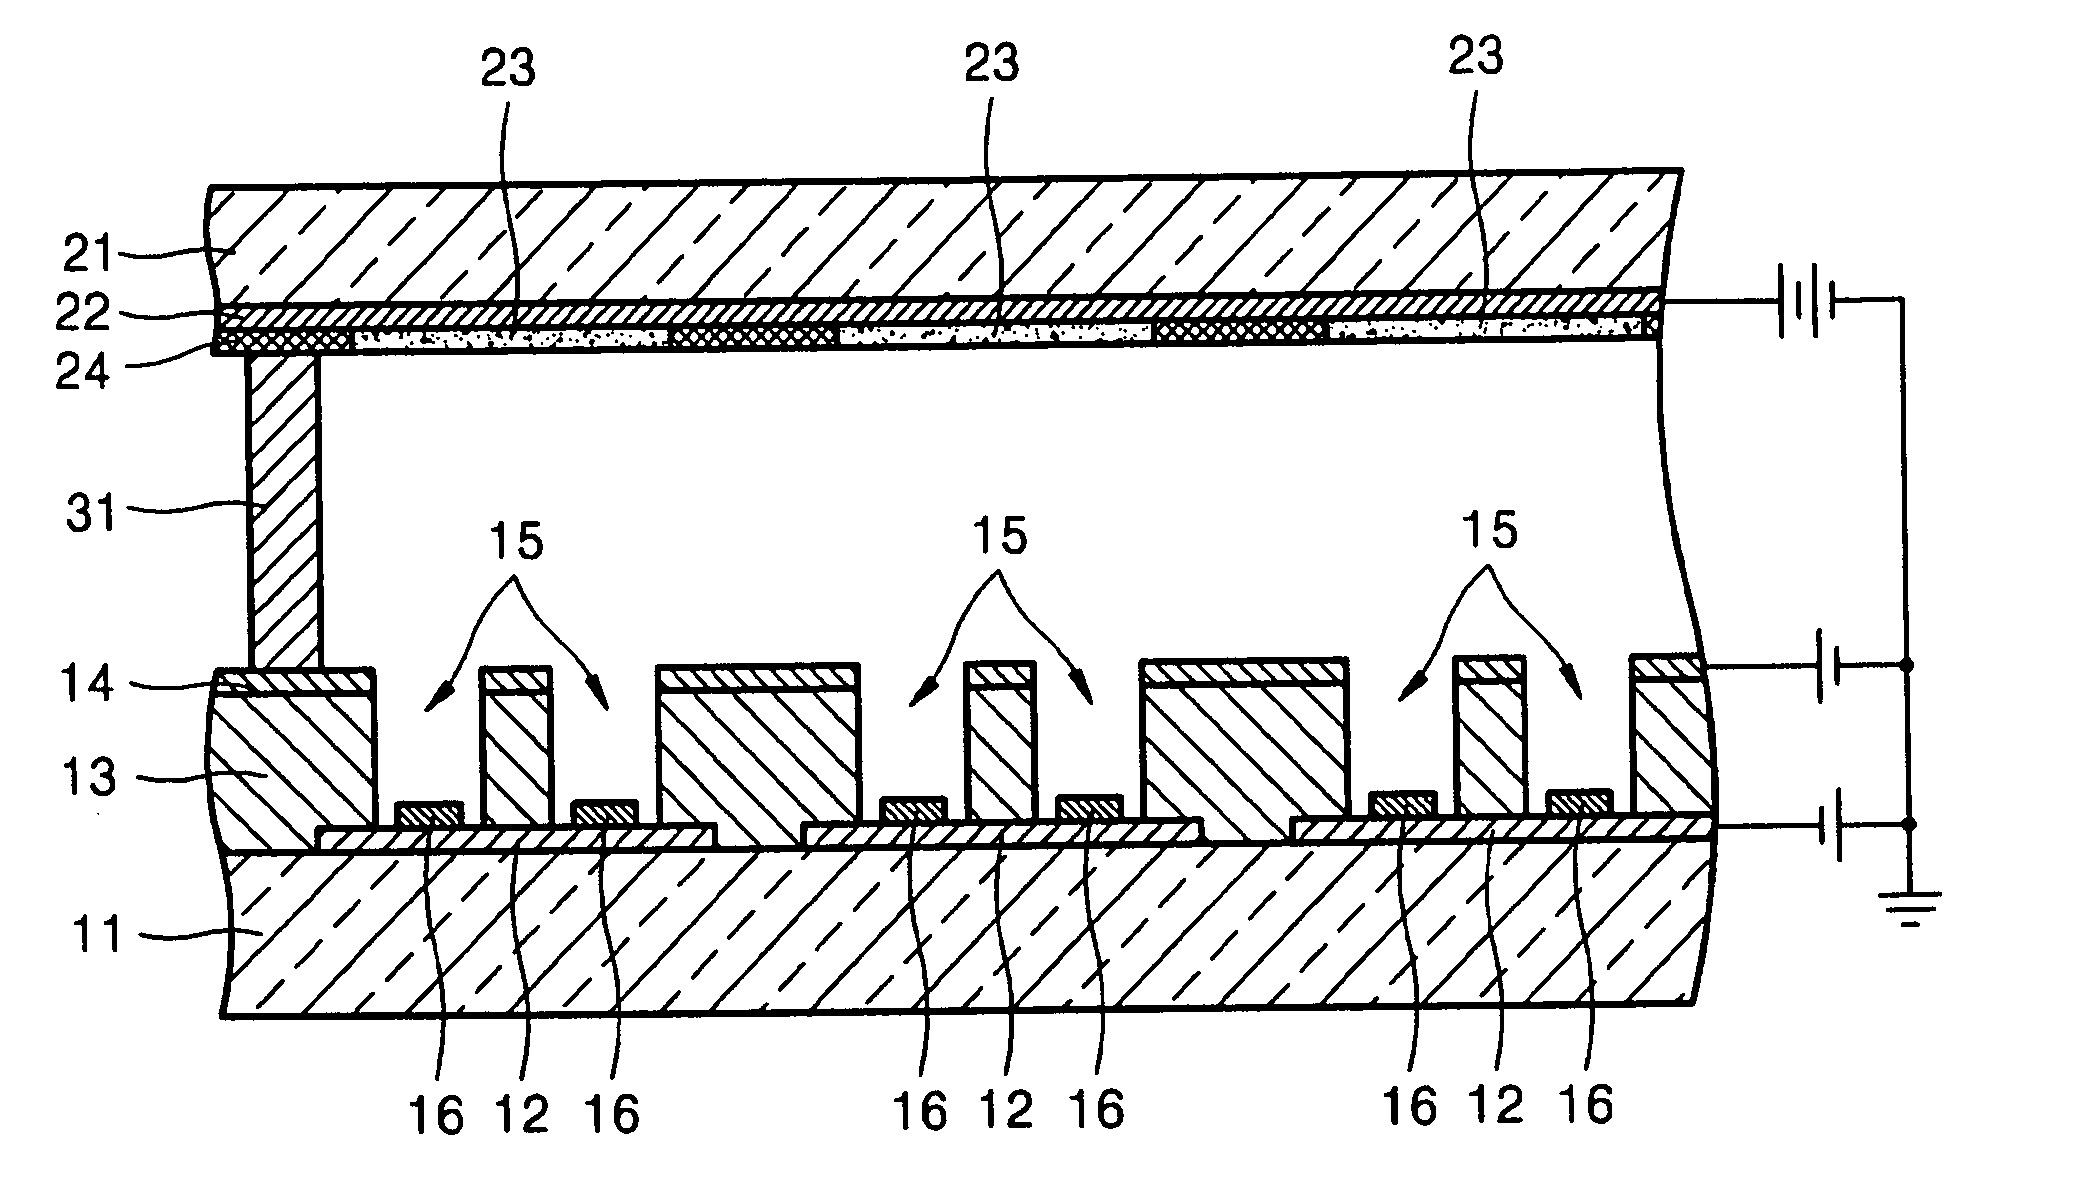 Field emission display (FED) and method of manufacture thereof